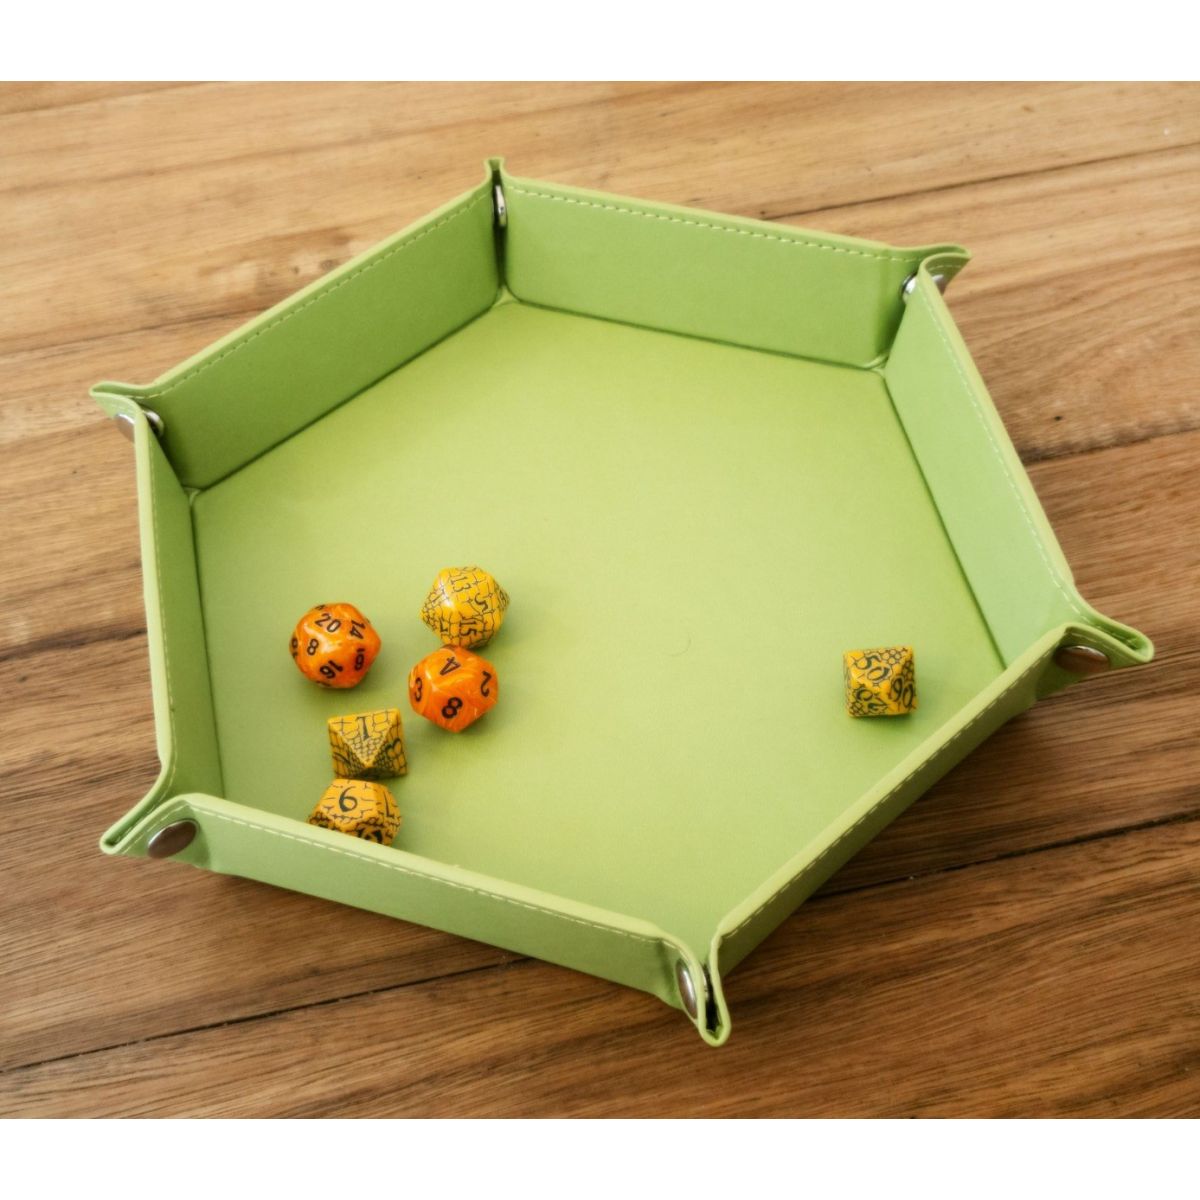 Green LPG Hex Dice Tray 8" | Lots Moore NSW